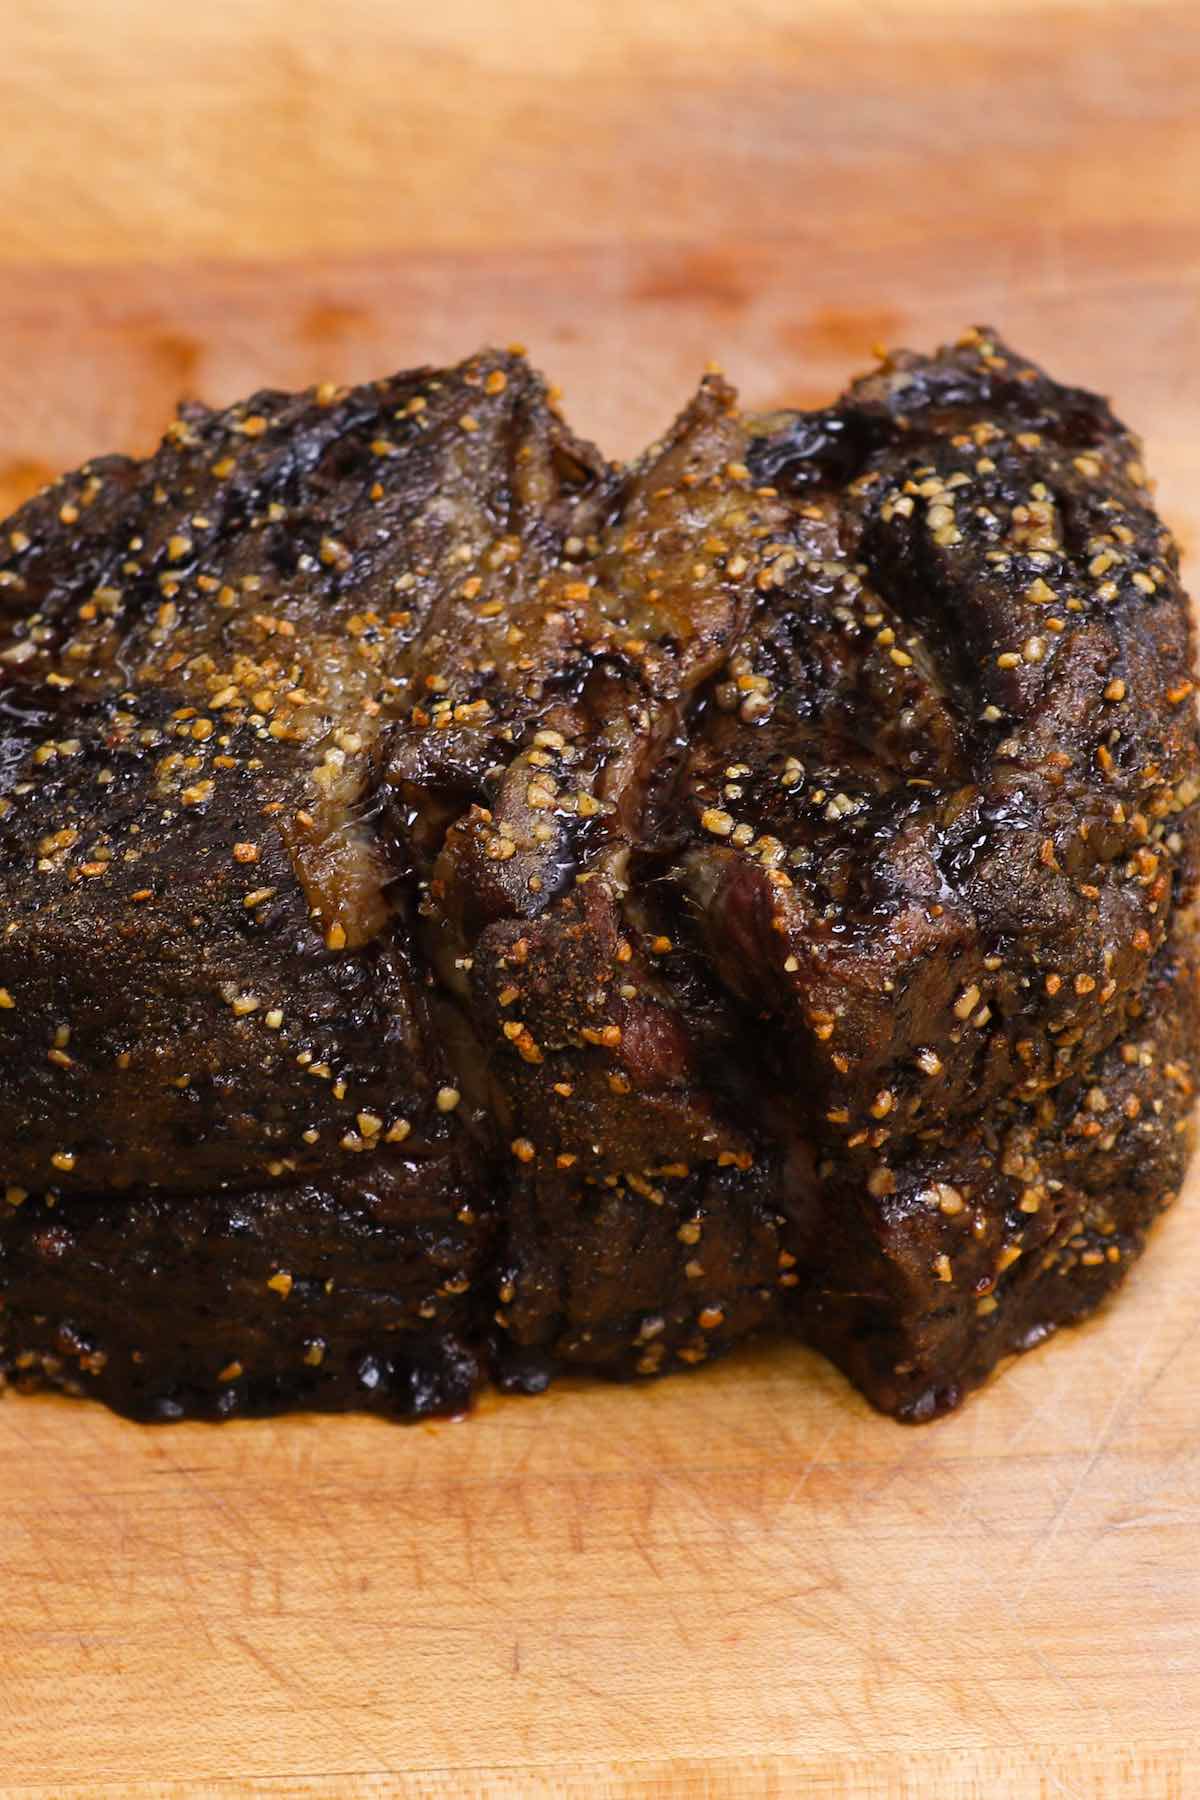 Perfectly smoked chuck roast showing bark on the outside